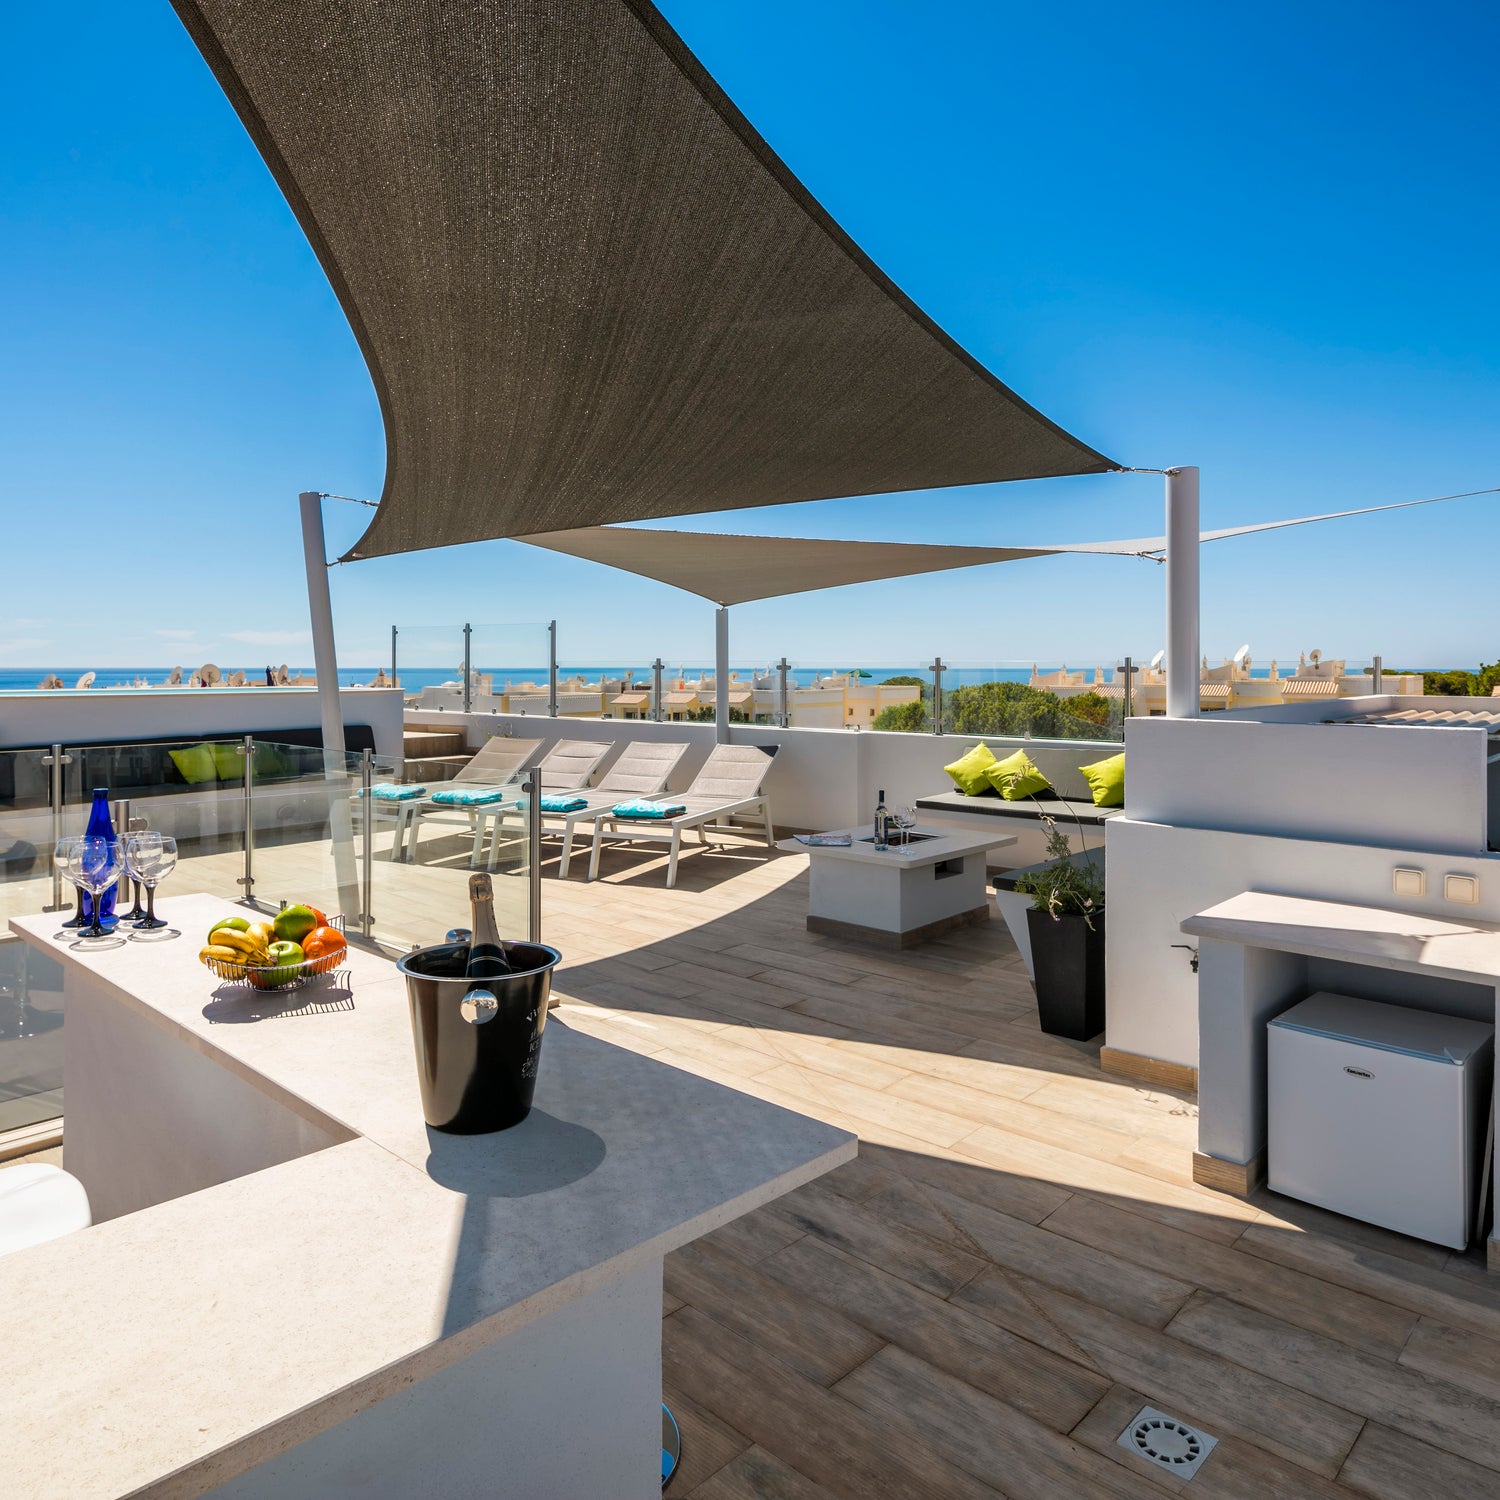 Image of a modern rooftop deck with a bar and deck chairs. There are two sundeck covers which are white and dark grey shading the area.